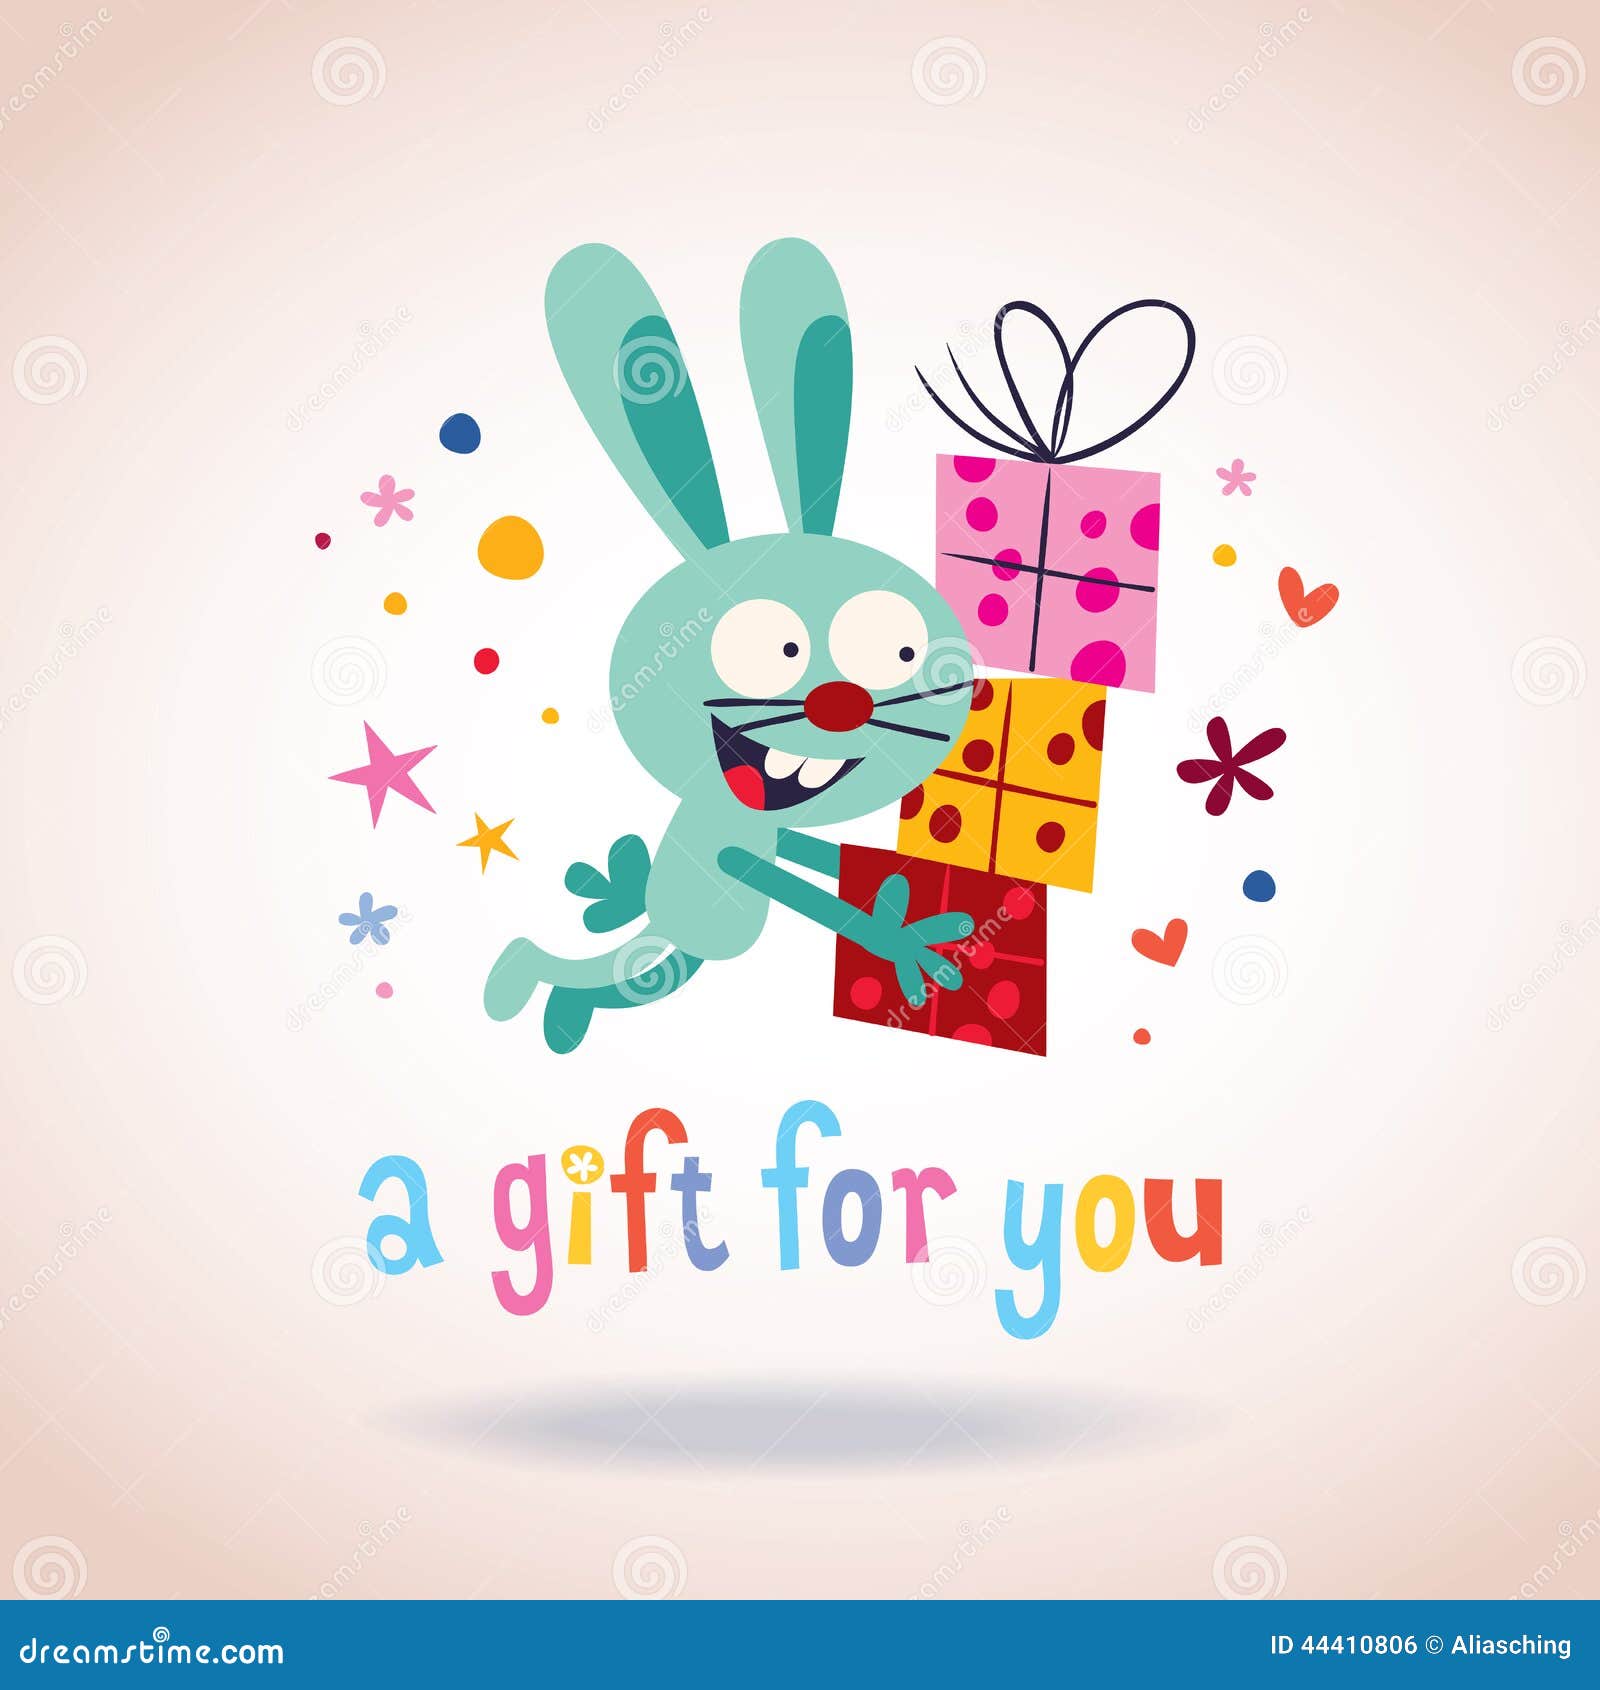 A Gift For You Bunny With Presents Stock Vector Illustration Of Christmas Present